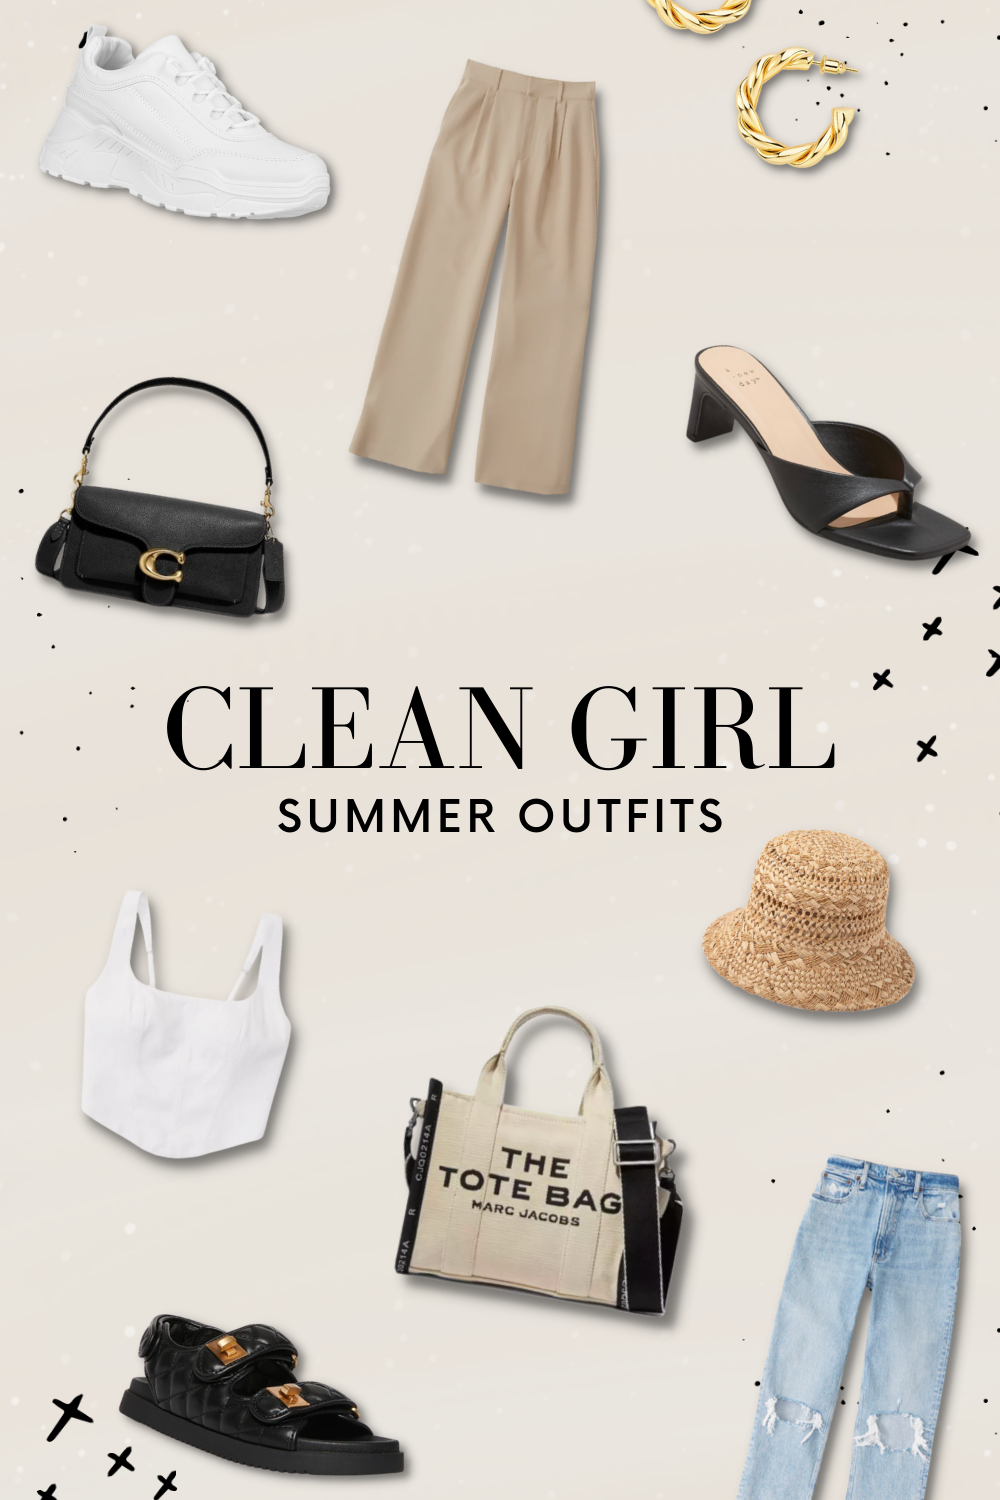 10 Clean Girl Summer Outfits - Casual + Effortless